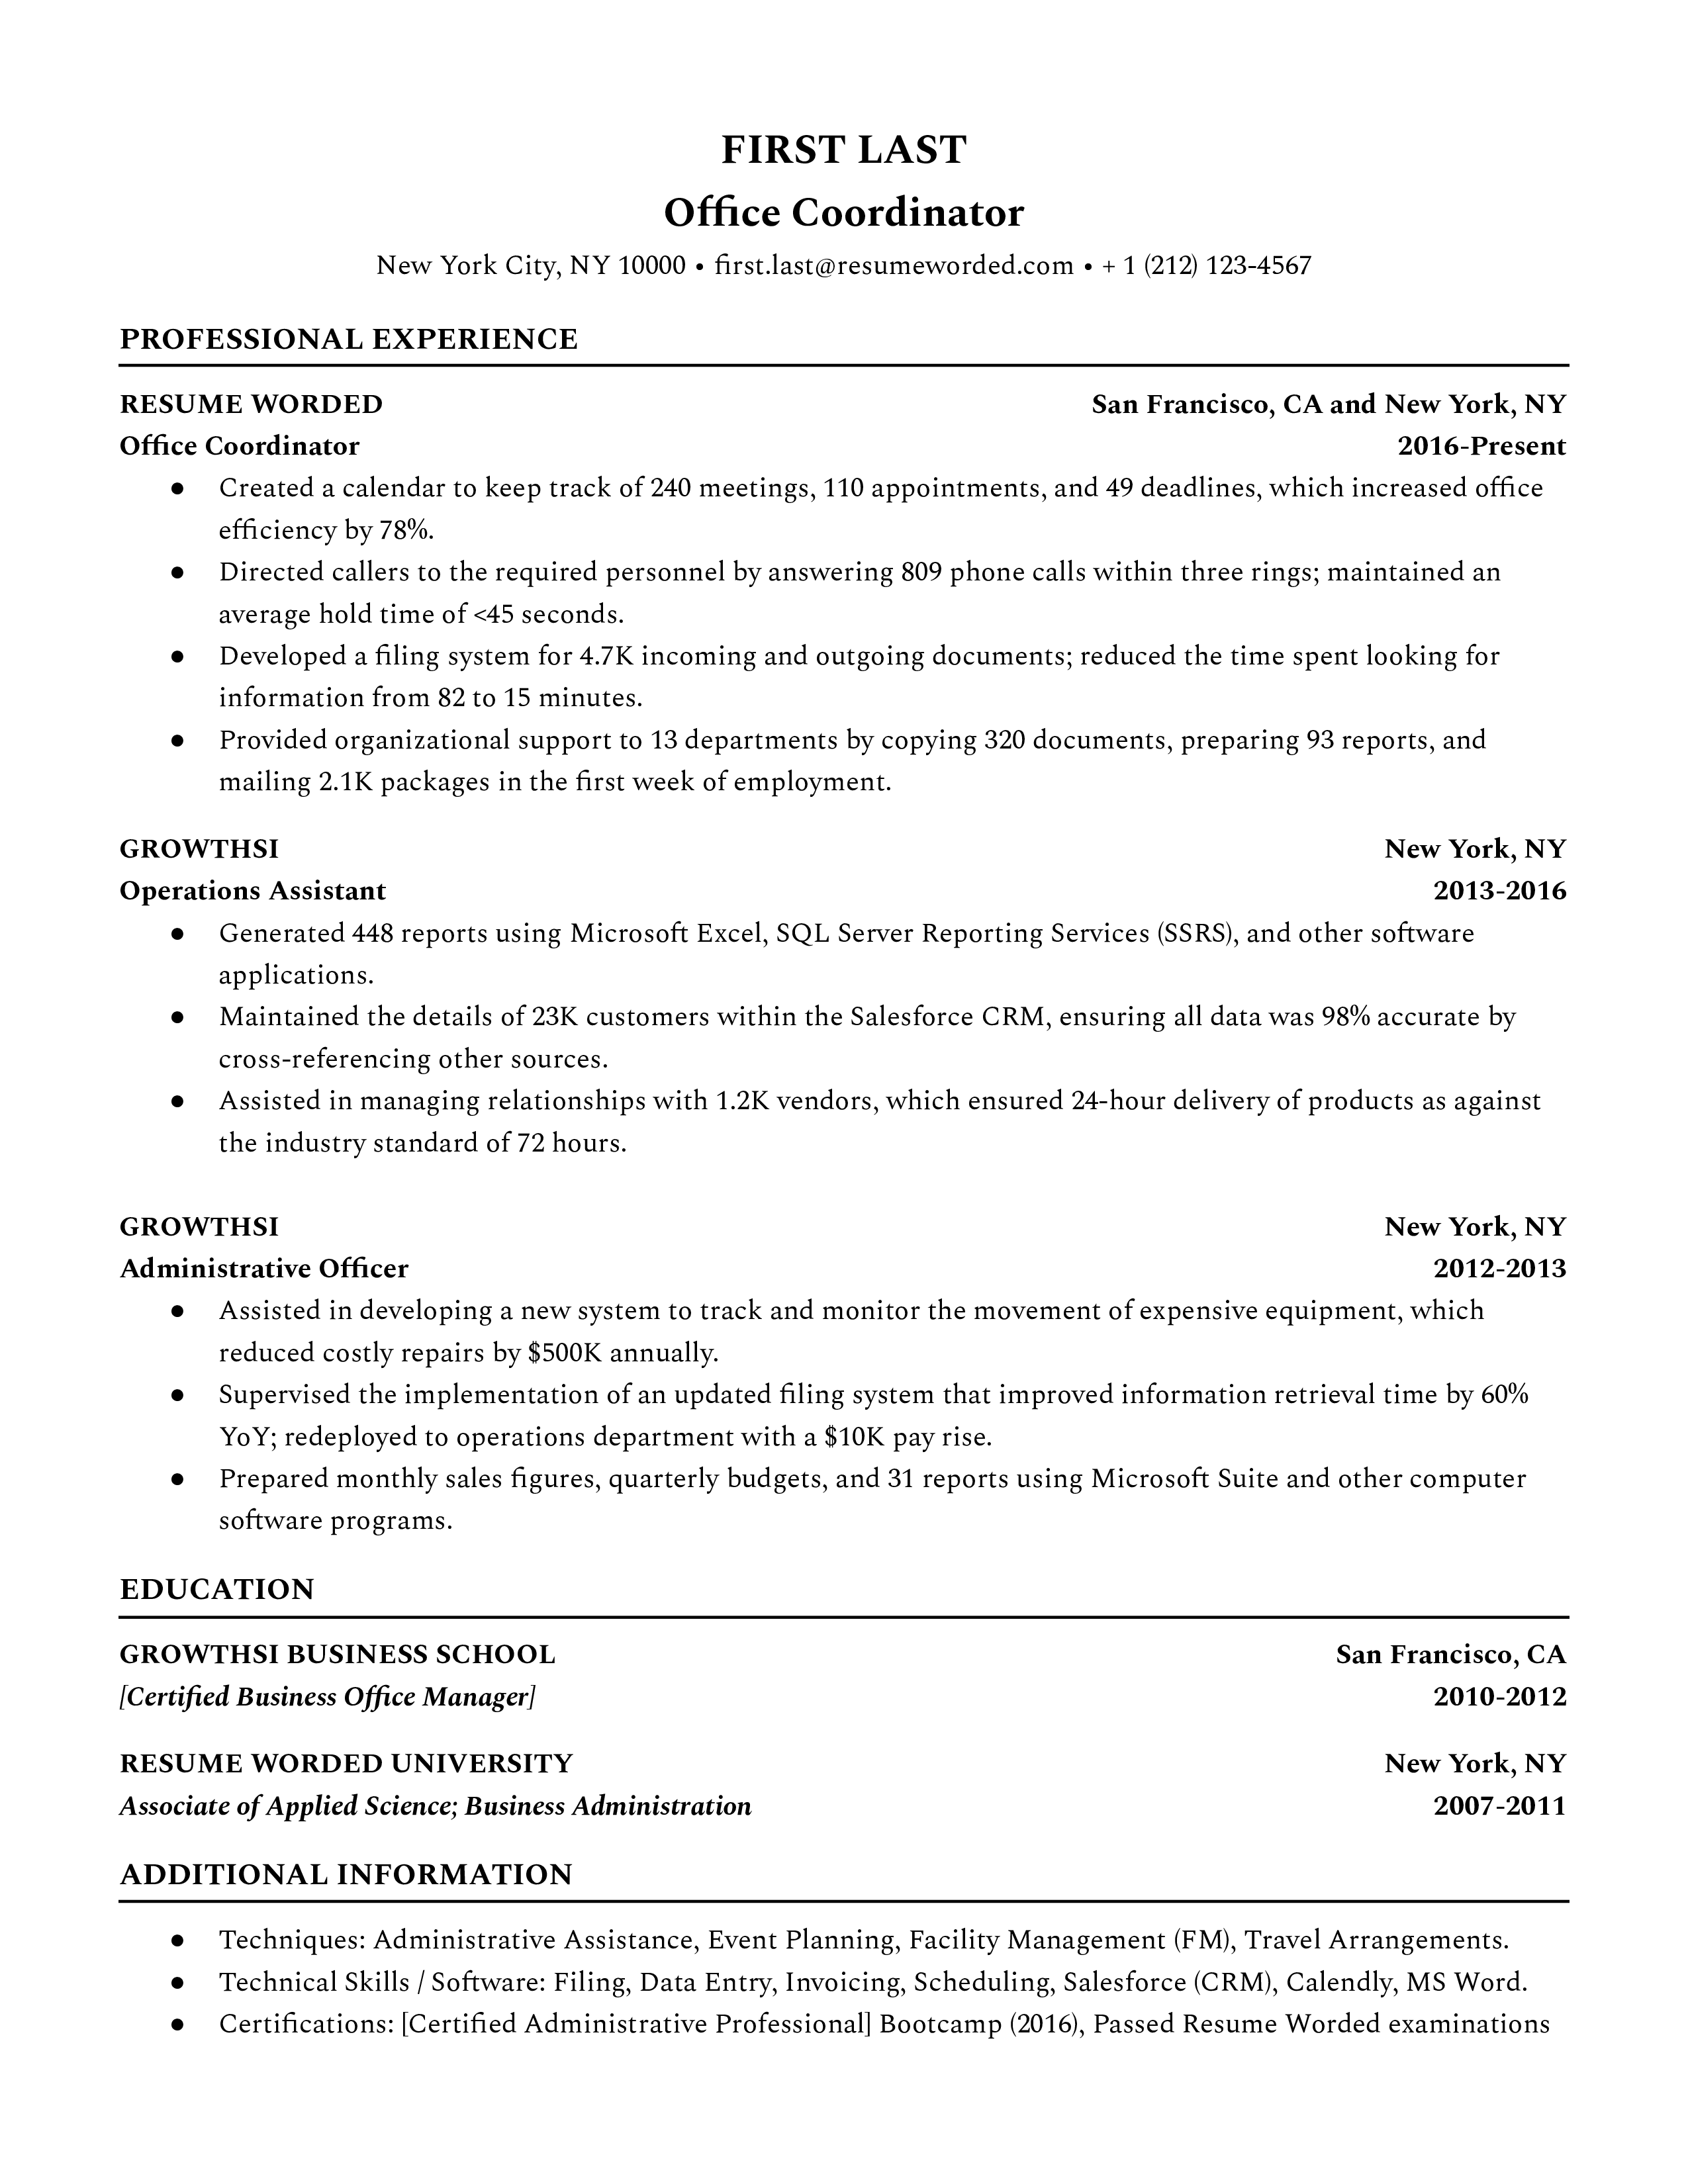 An office coordinator resume template that prioritizes work experience. 